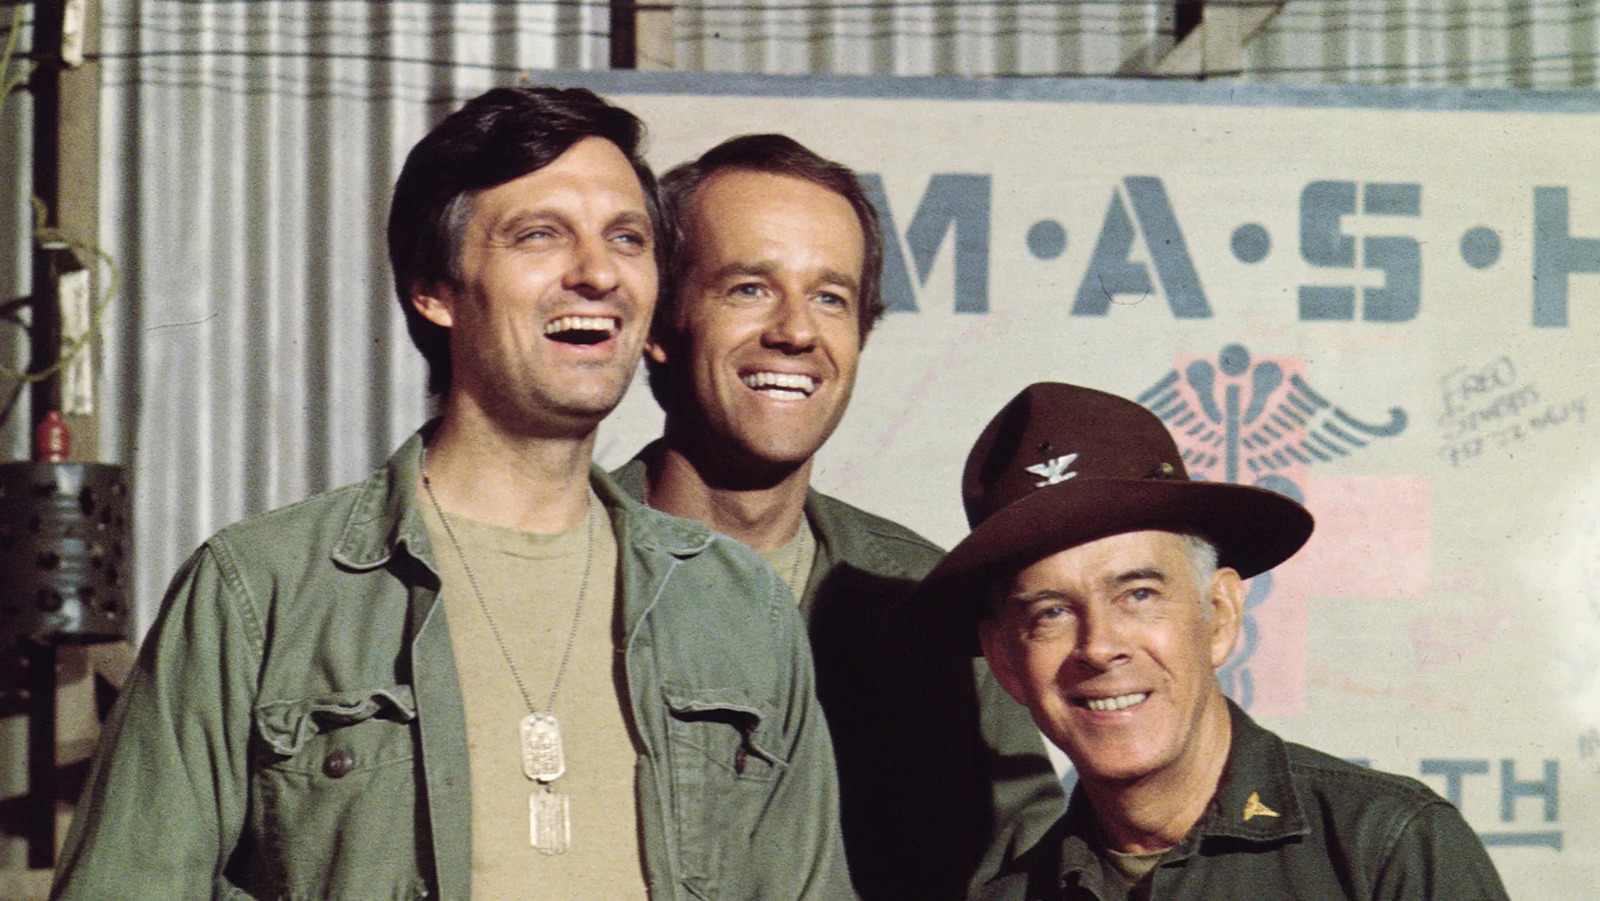 The Daily Stream: M*A*S*H is an endlessly revolutionary anti-war sitcom